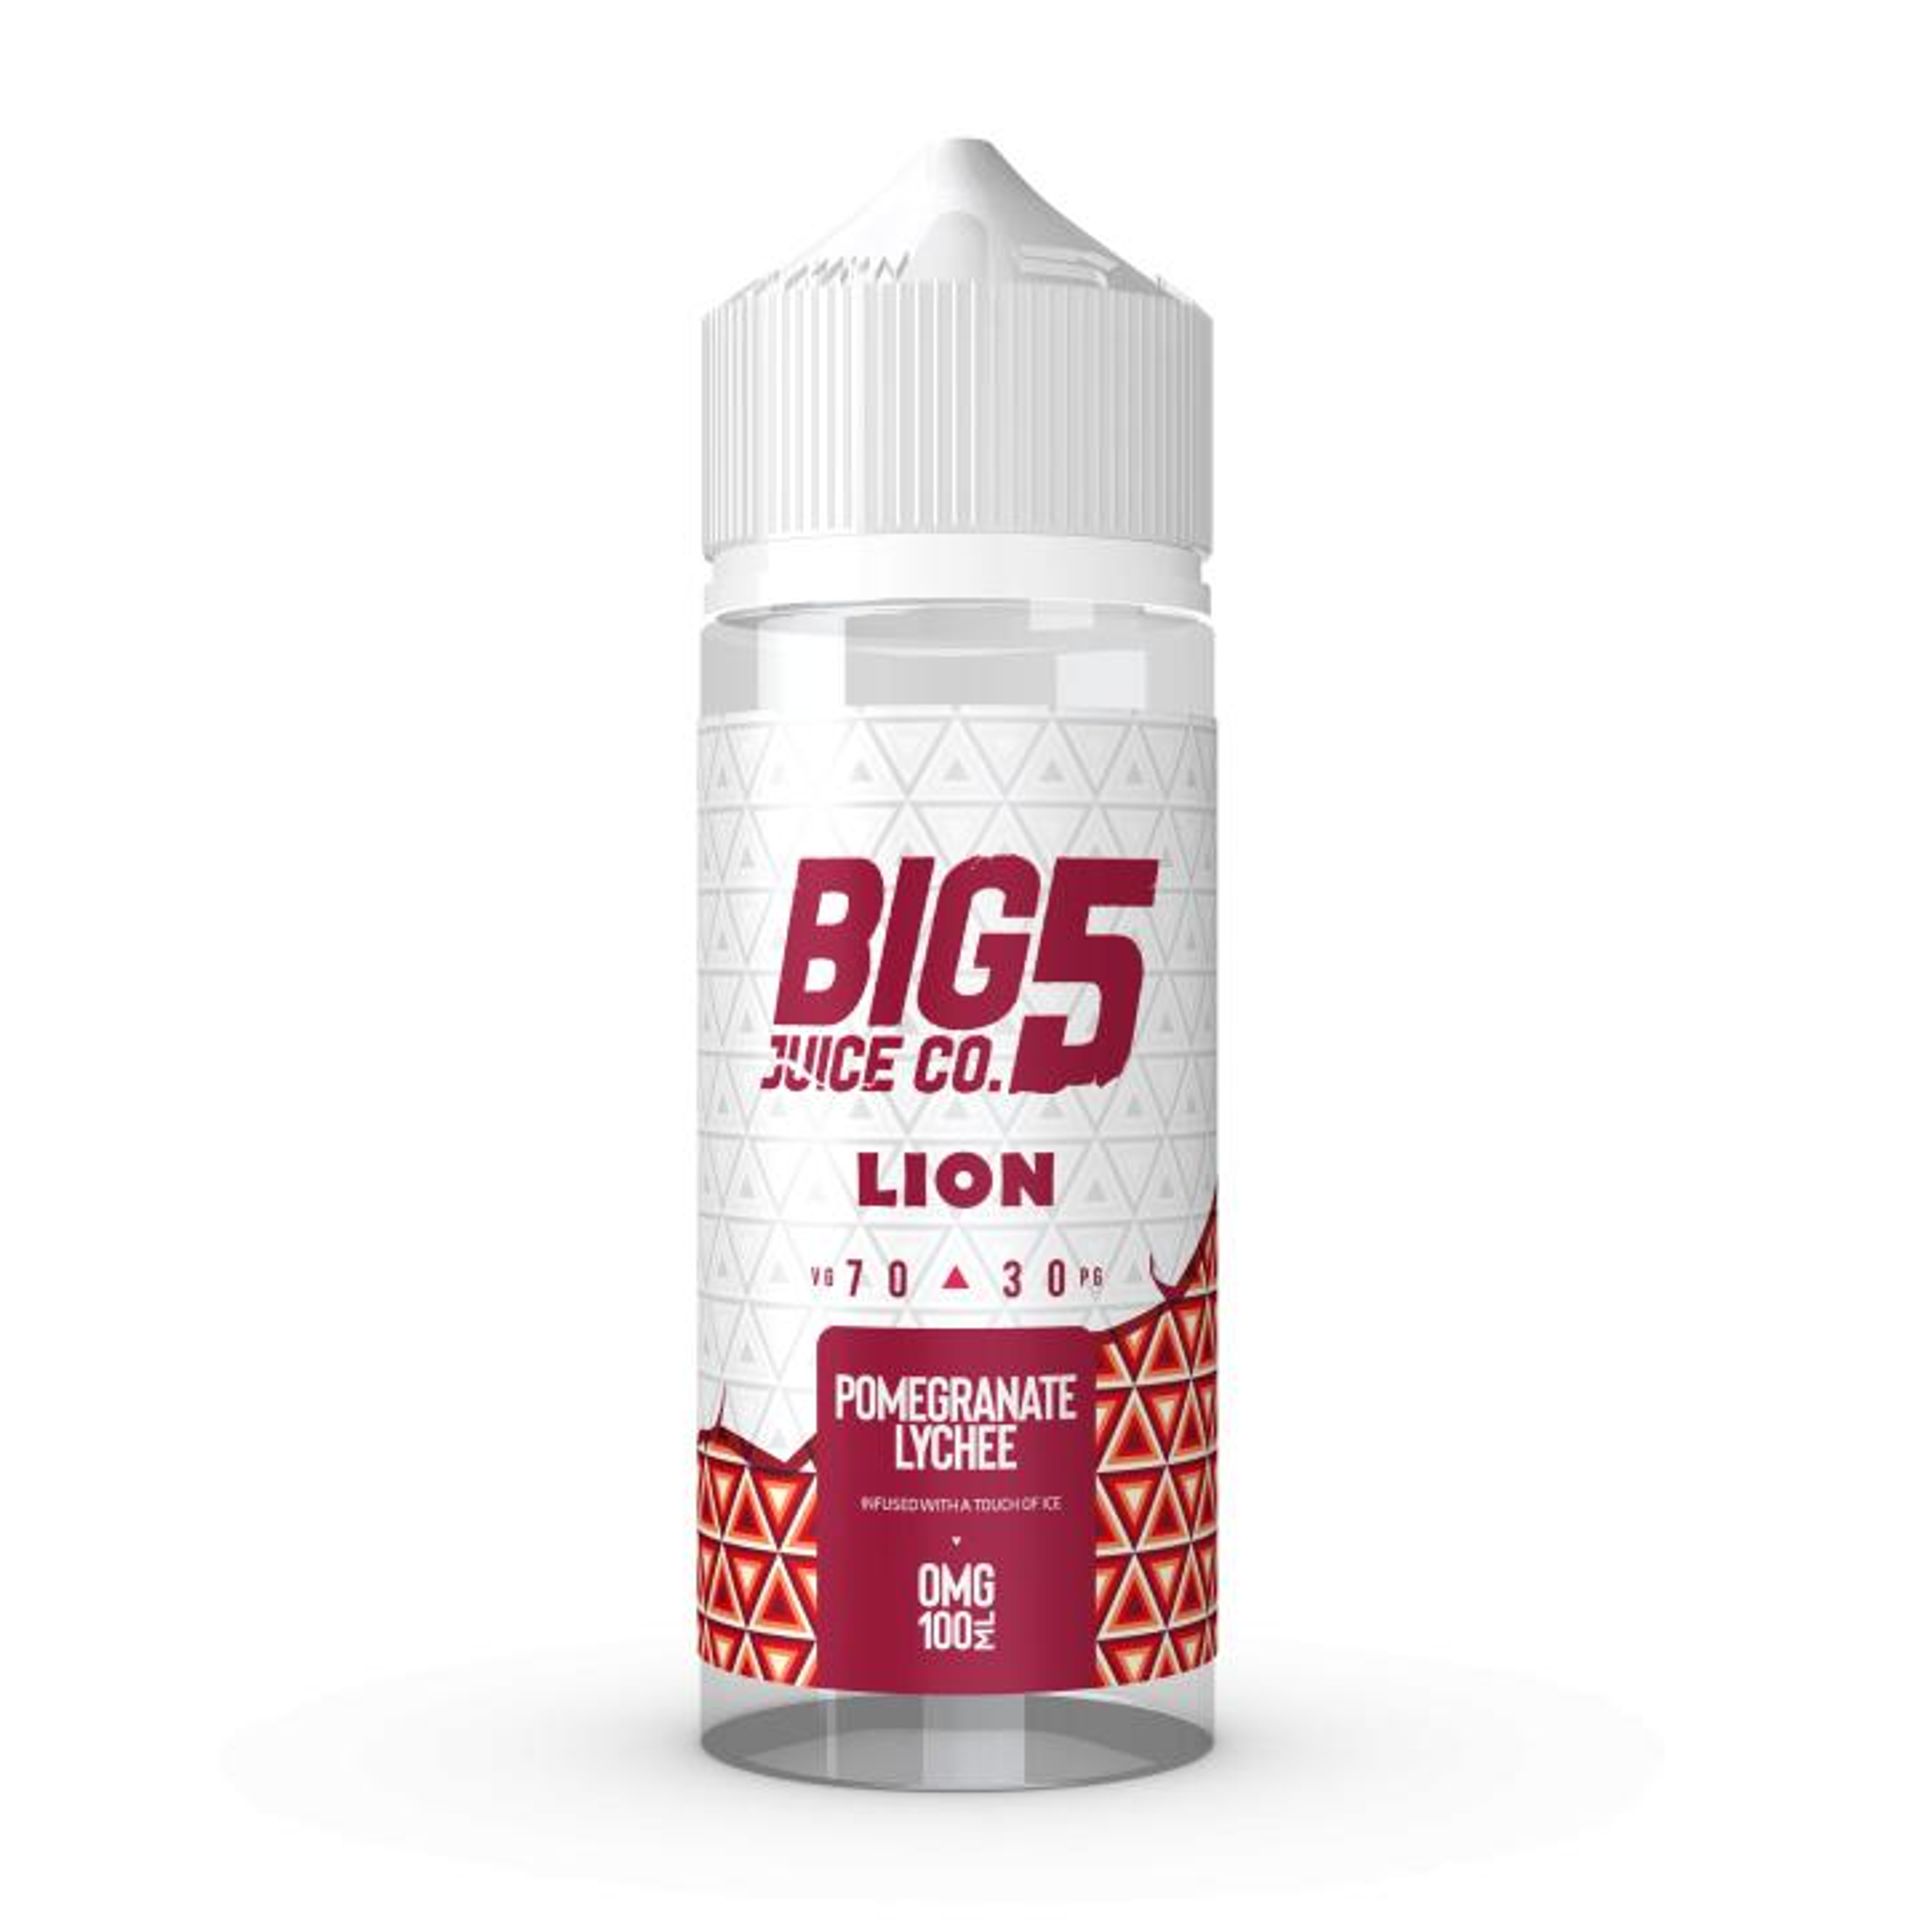 Image of Lion by Big 5